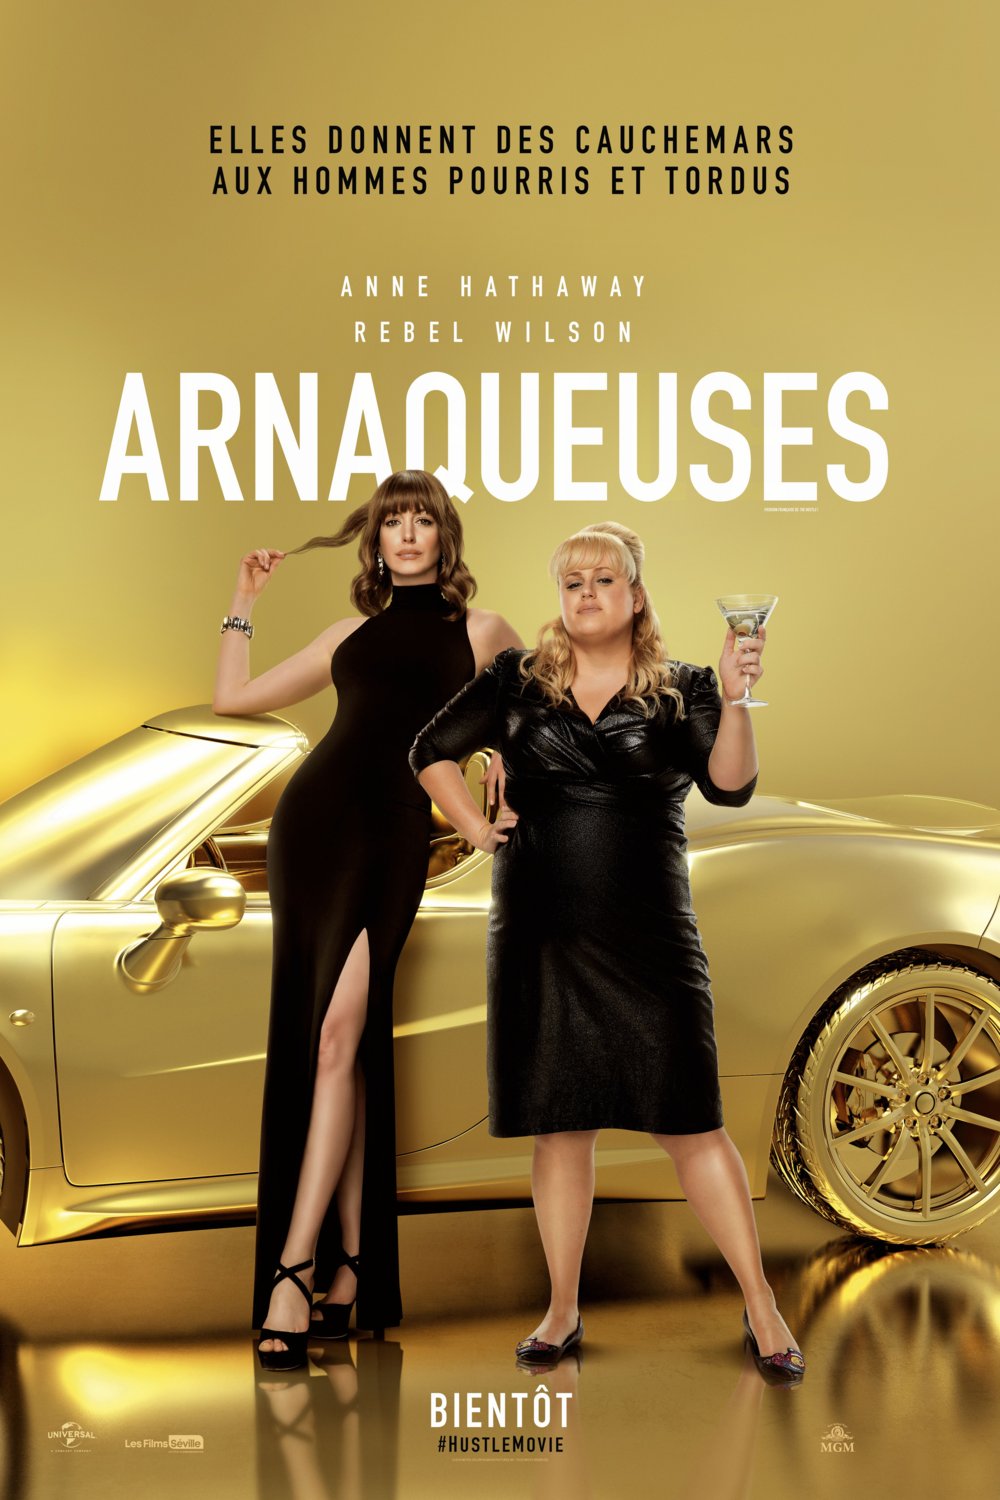 Poster of the movie Arnaqueuses